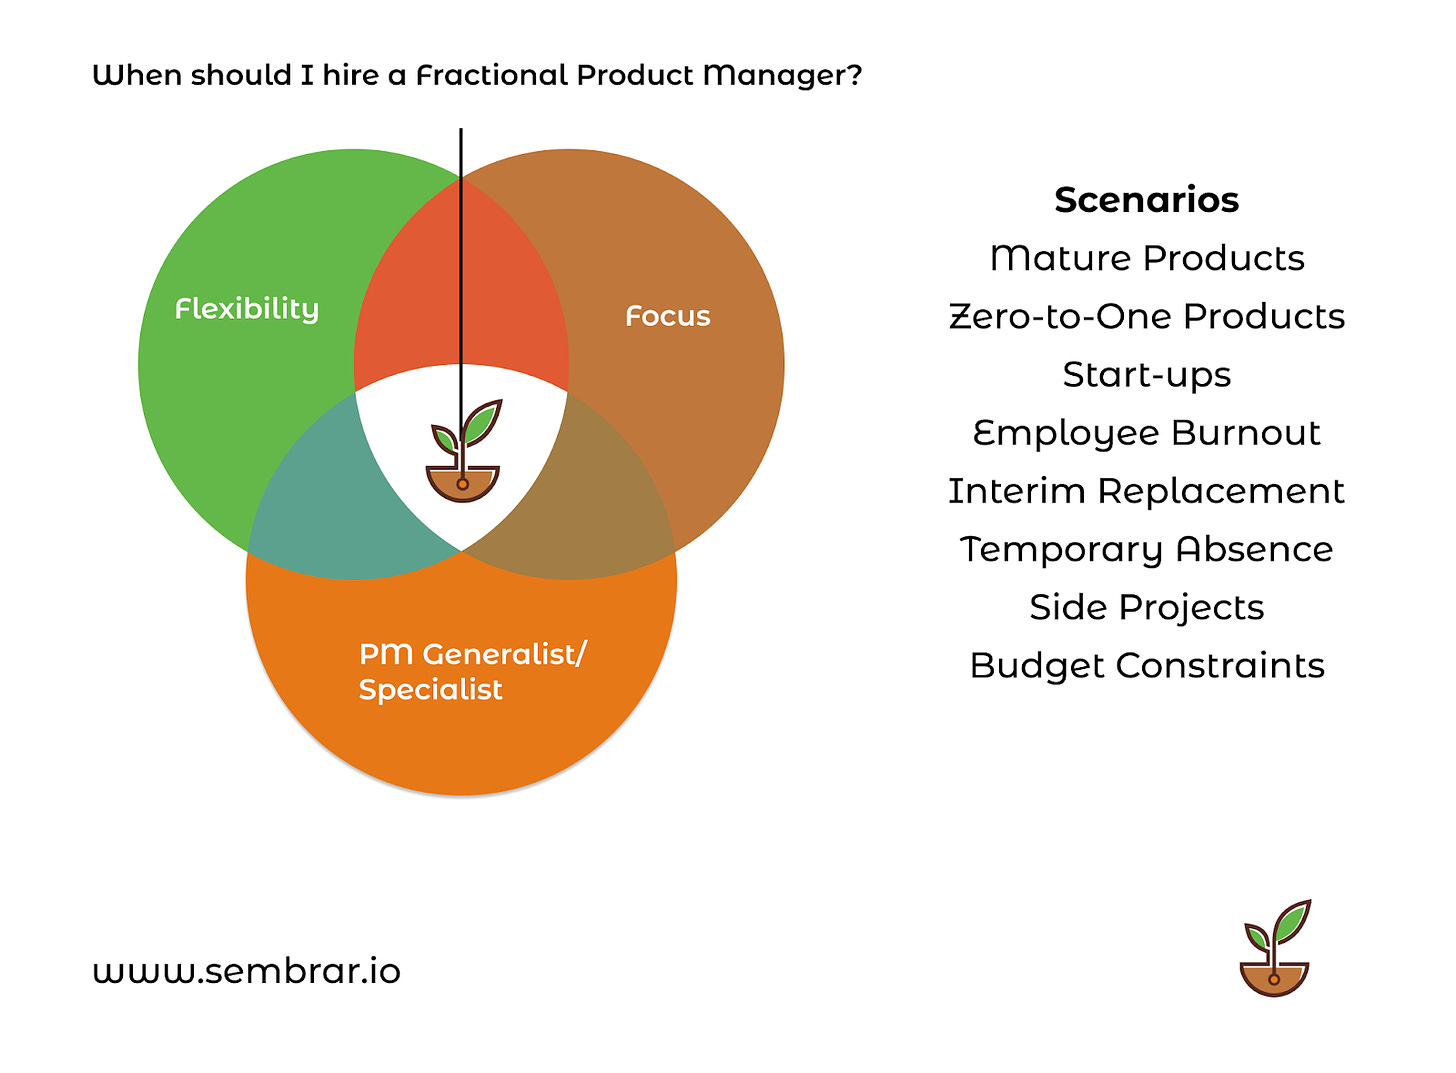 Brandon Gardner on demystifying the Fractional Product Manager Role